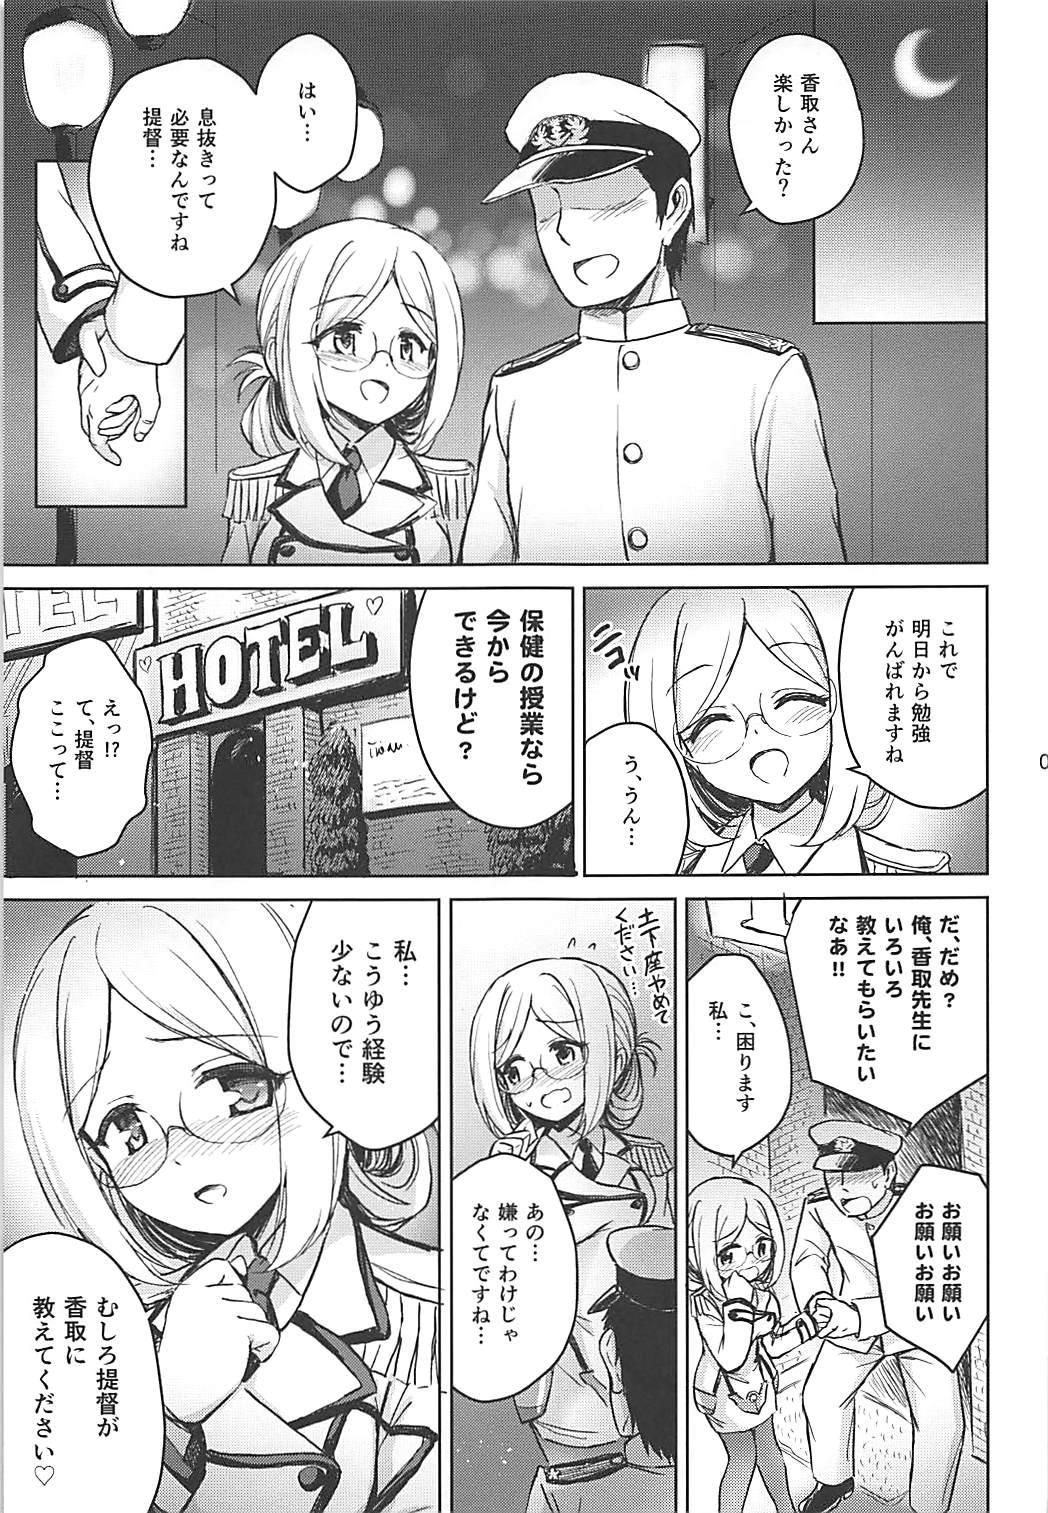 Gostosa Aventure de Catherine - Kantai collection Babes - Page 7